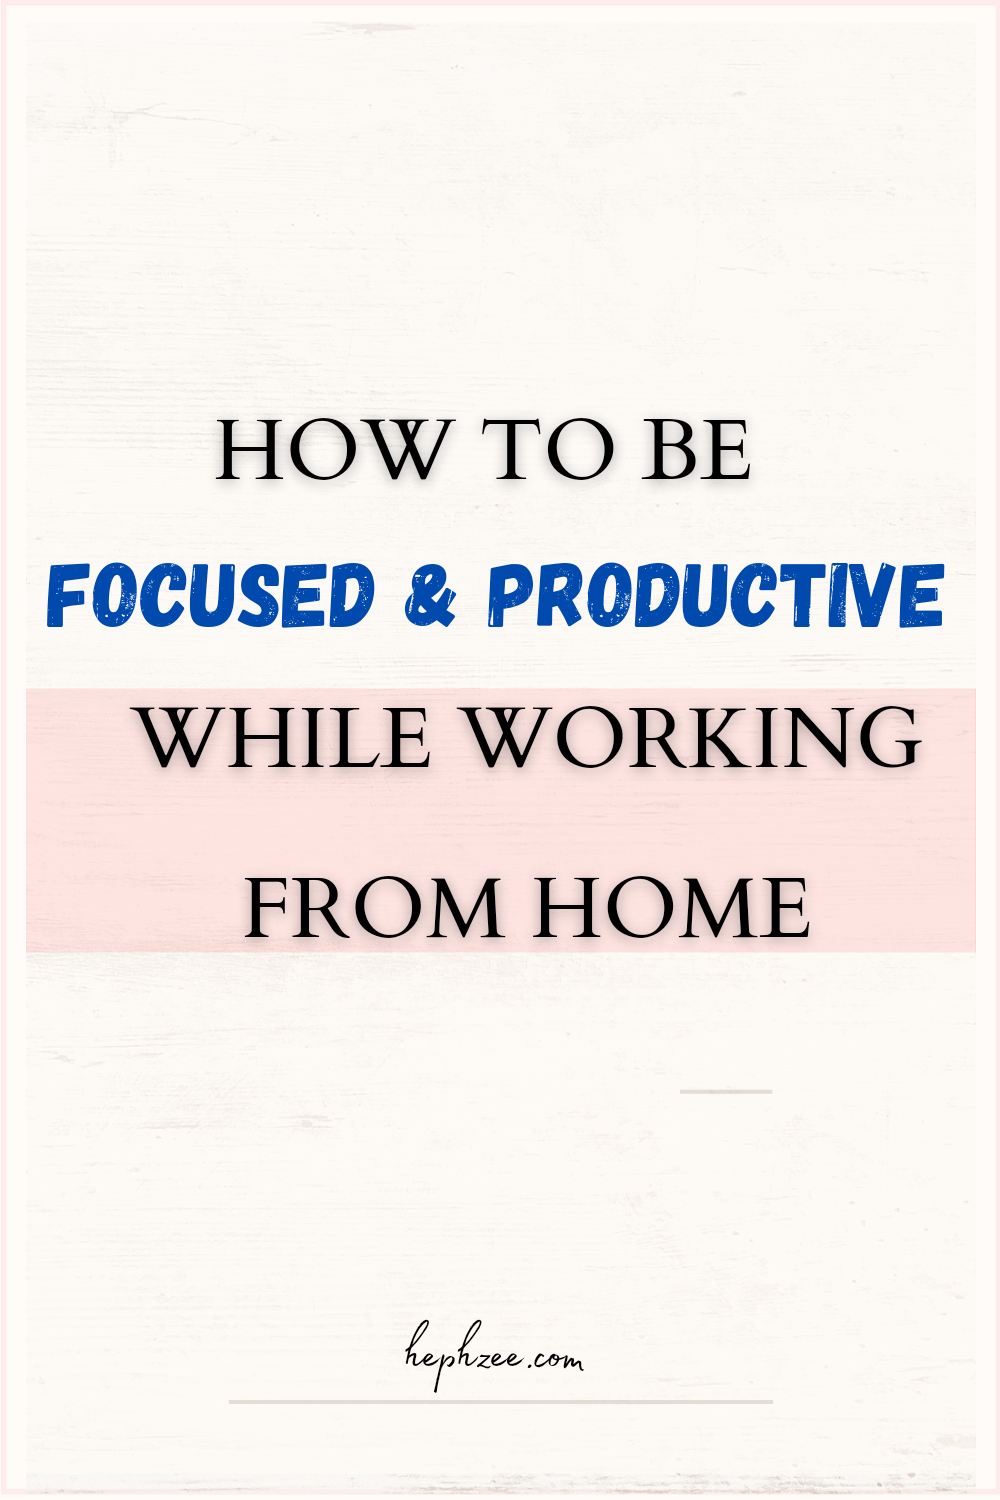 How to be focused and productive while working from home